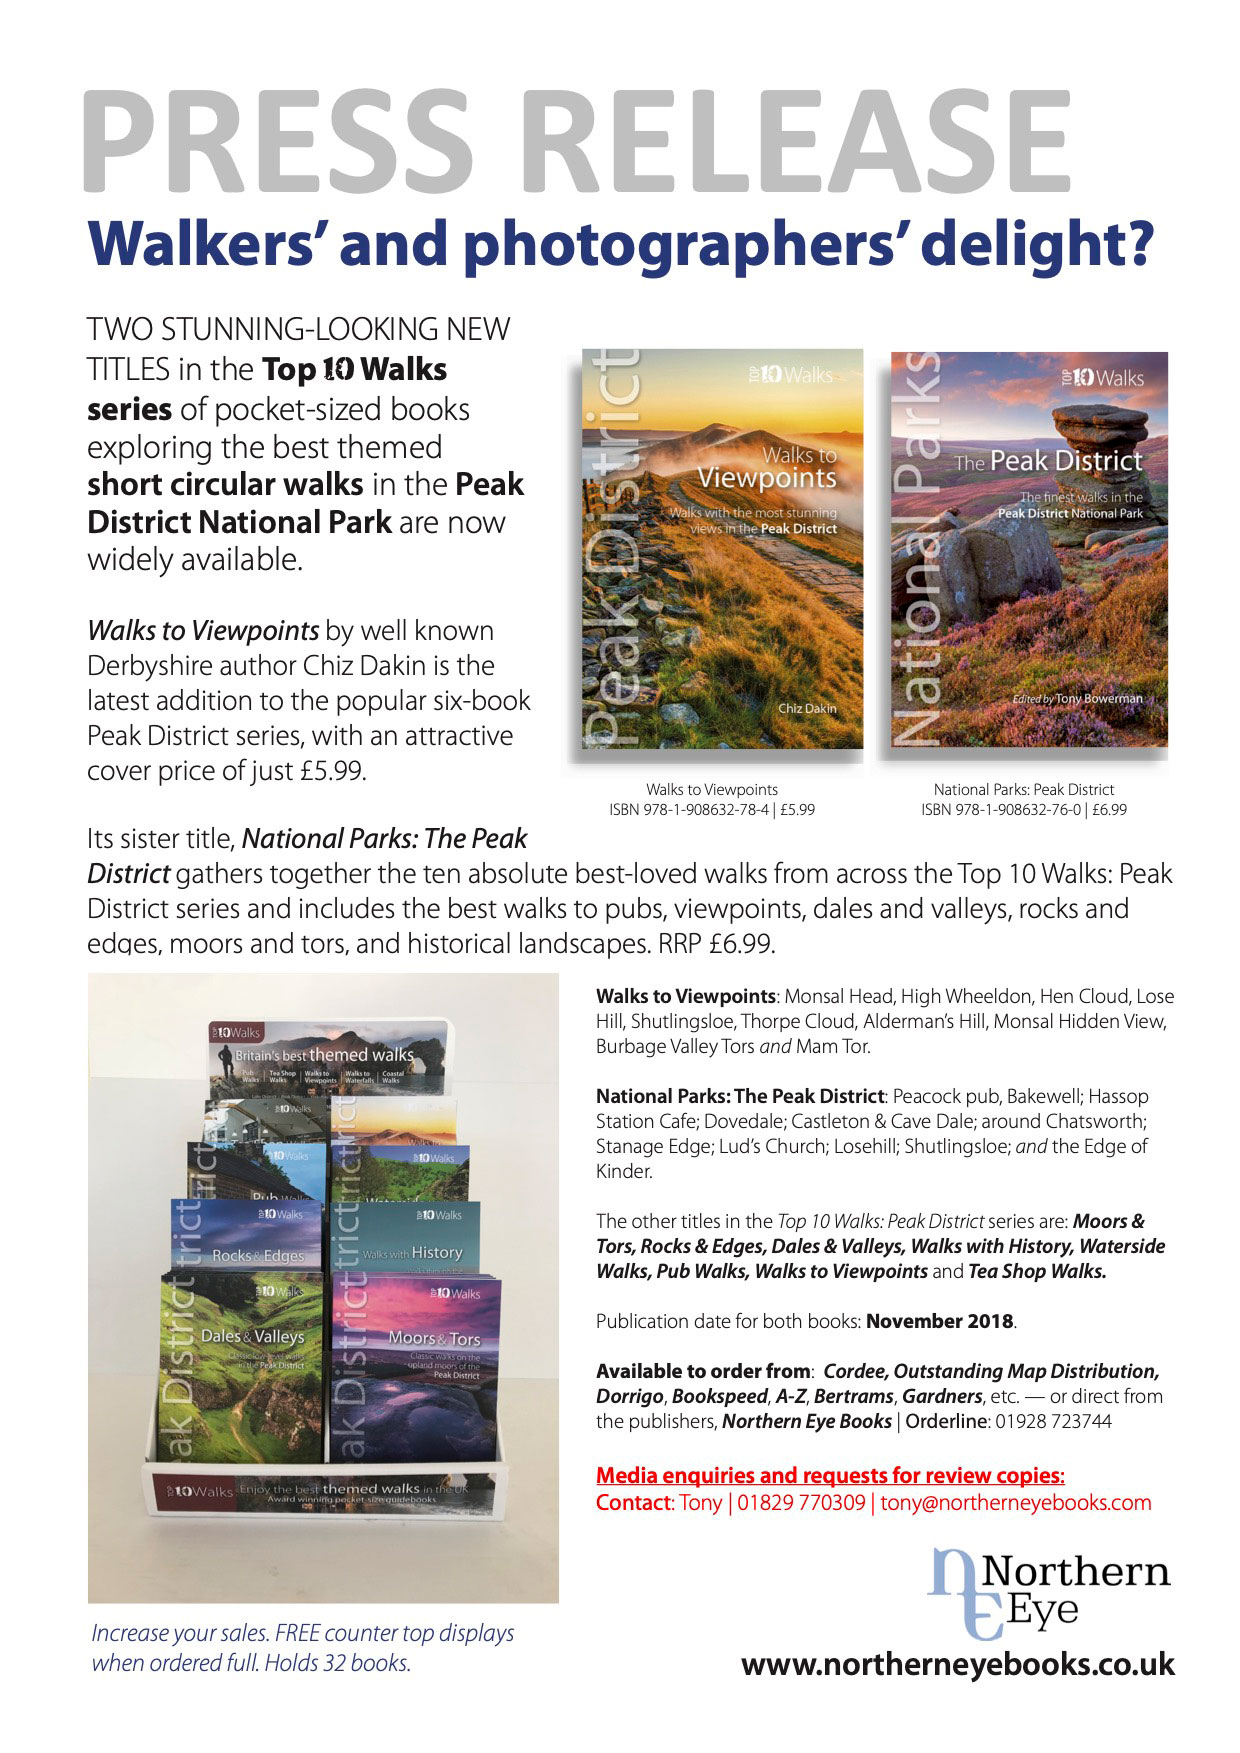 Walkers' and Photographers' delight - two new book of the finest walks to viewpoints sand iconic places in the Peak District National Park